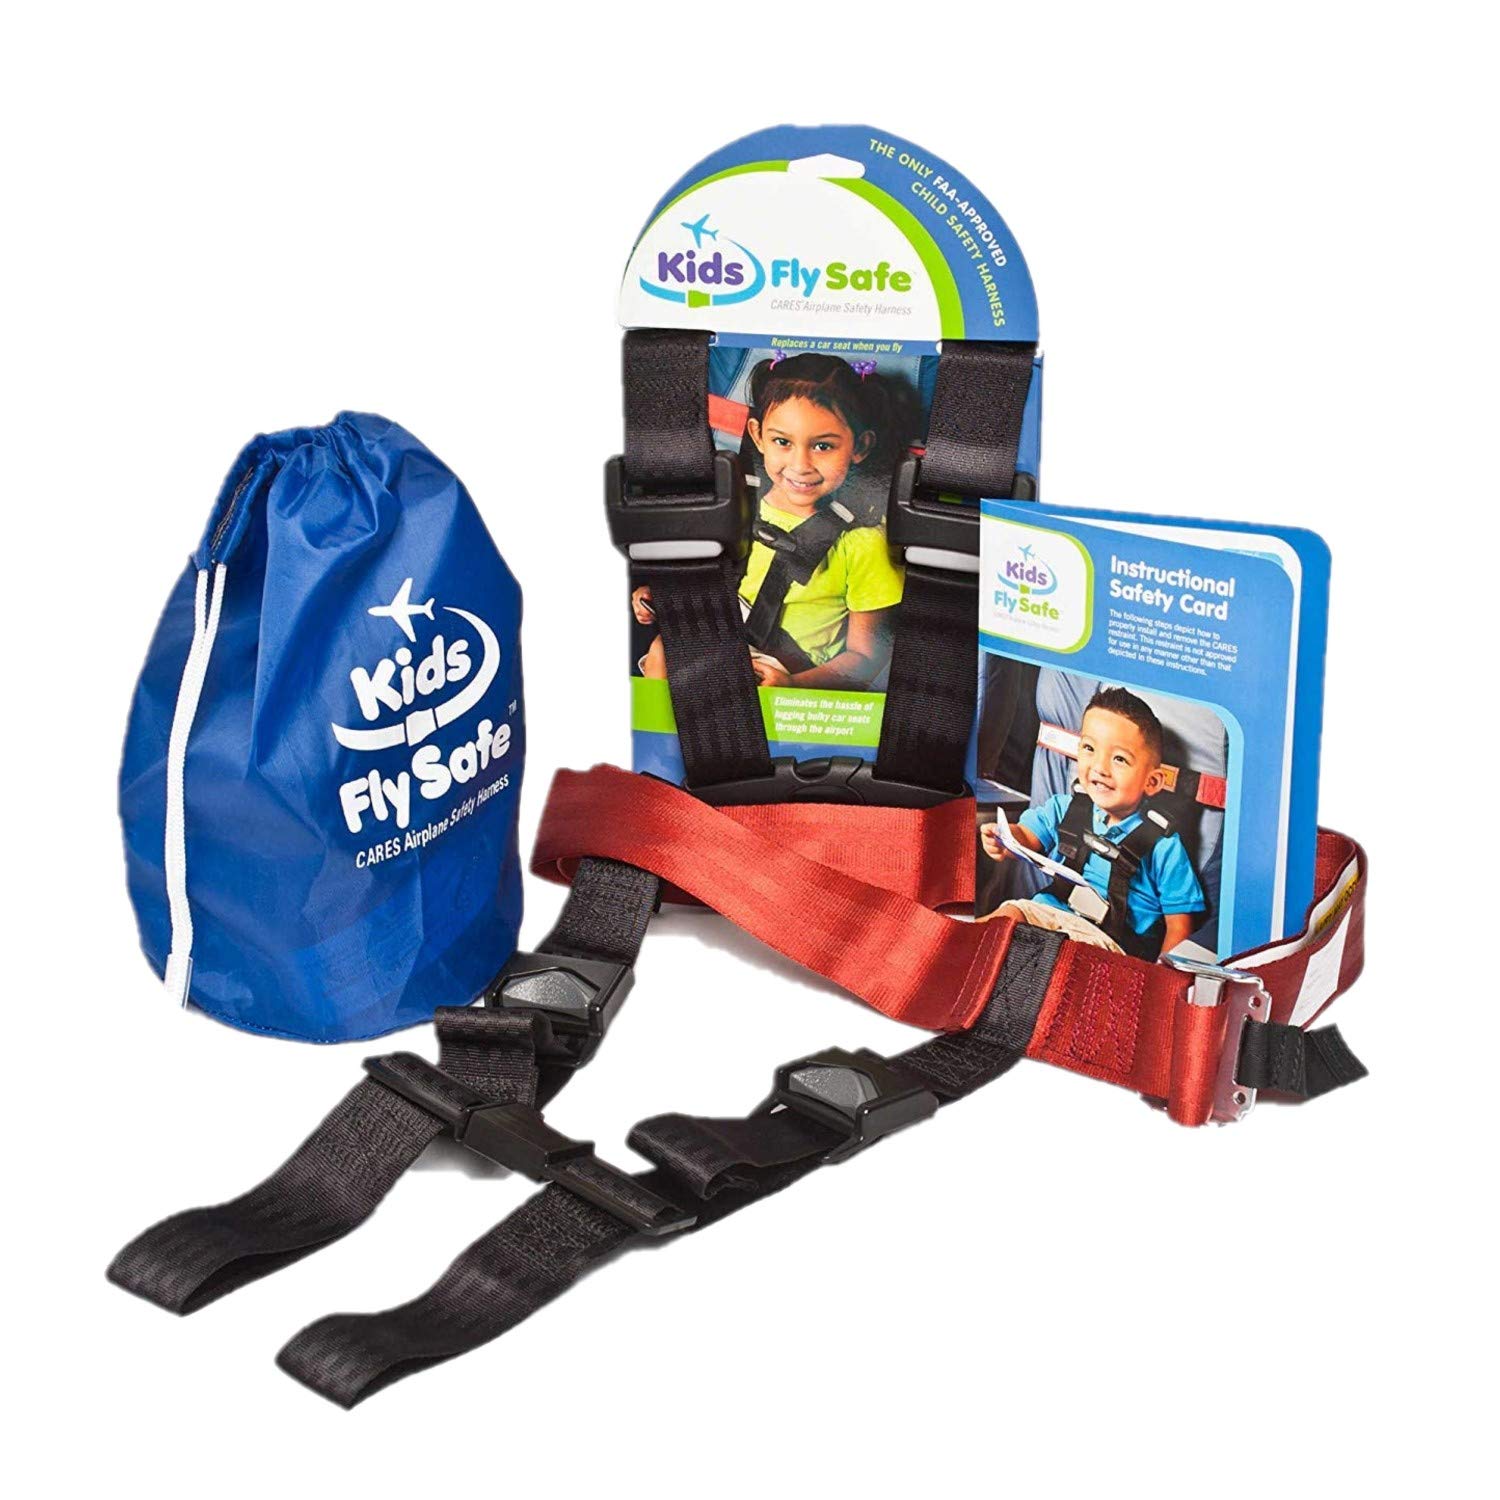 Child Airplane Travel Harness - Cares Safety Restraint System - The Only FAA Approved Child Flying Safety Device